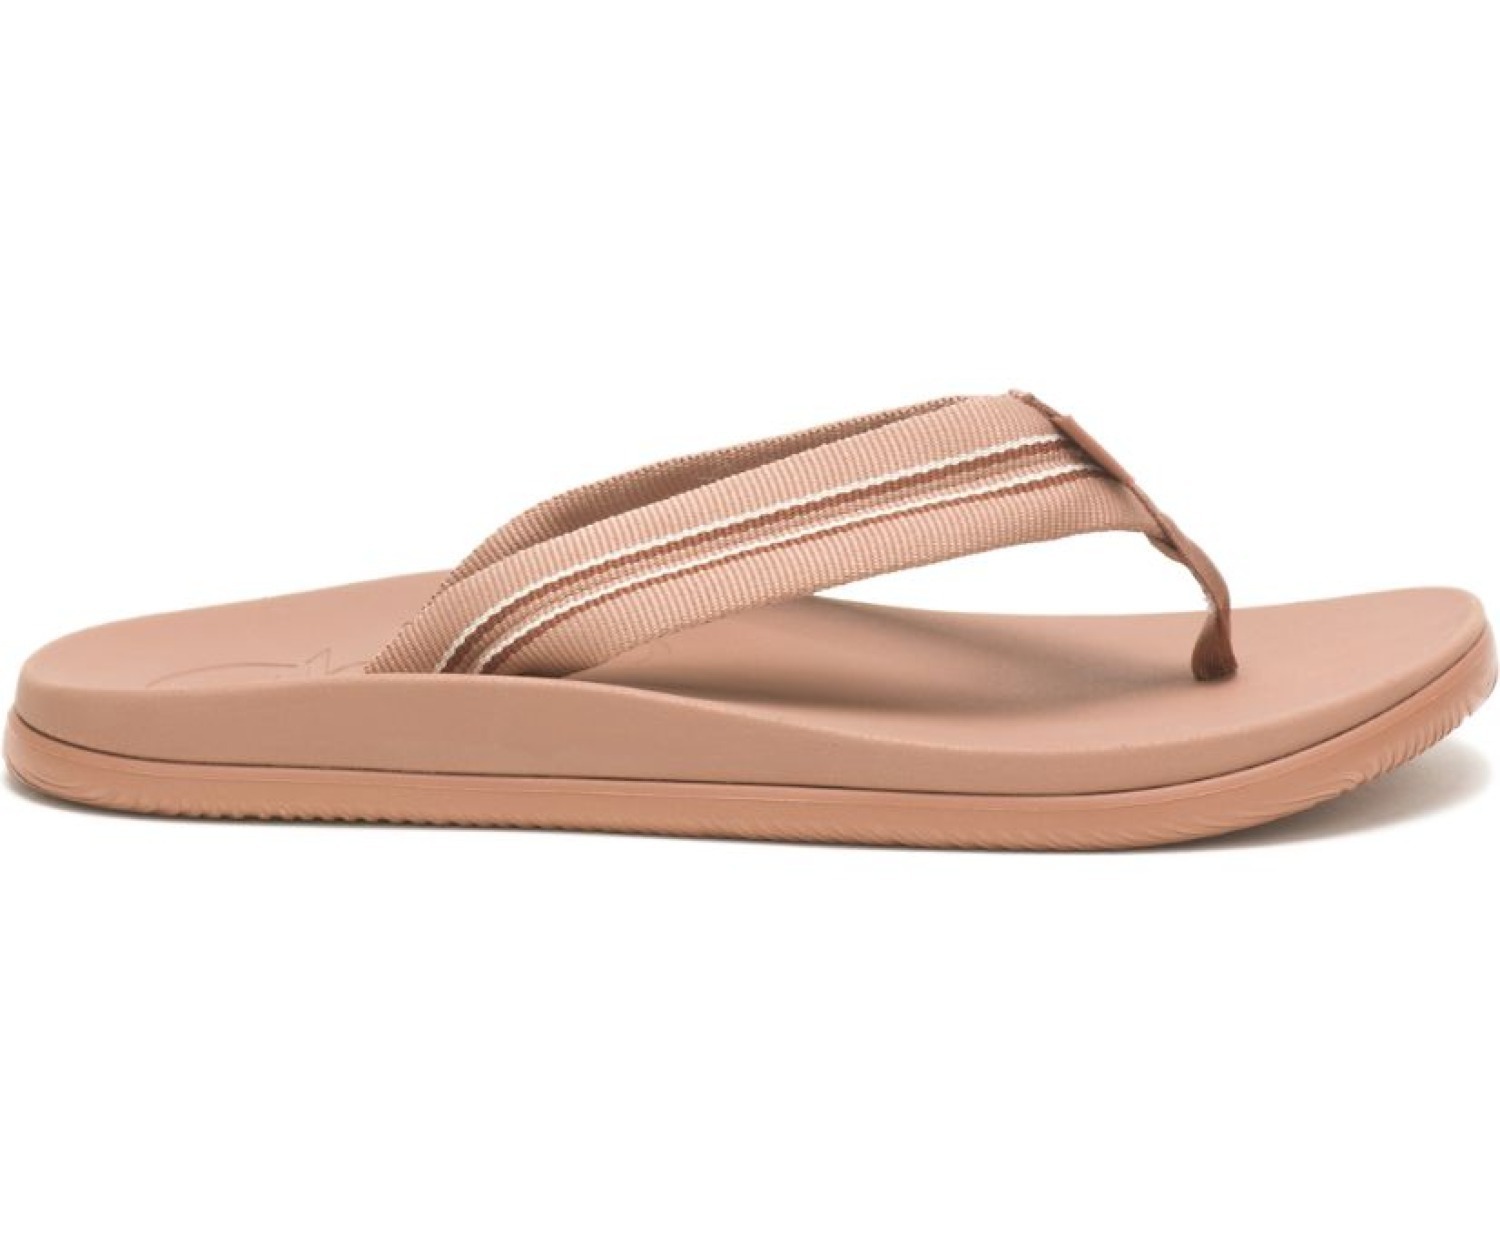 Chacos Extra 35% Off Sale: Men's & Women's Chillos Flip $13, Z/1 Classic Sandal $39, Women's Ramble Puff $42.24 & More + Free Shipping